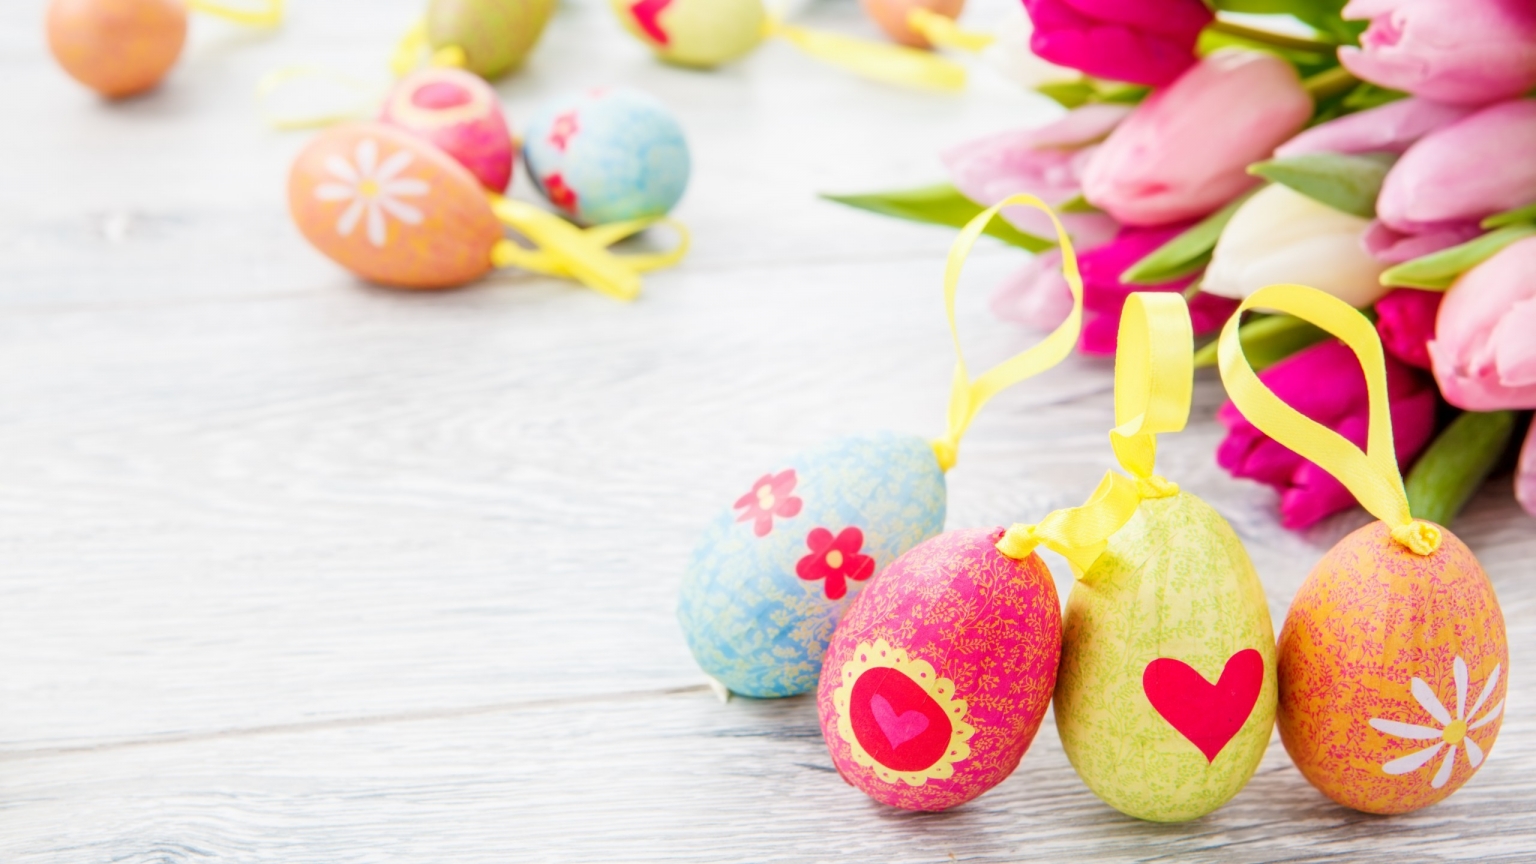 Decorative Easter Eggs for 1536 x 864 HDTV resolution